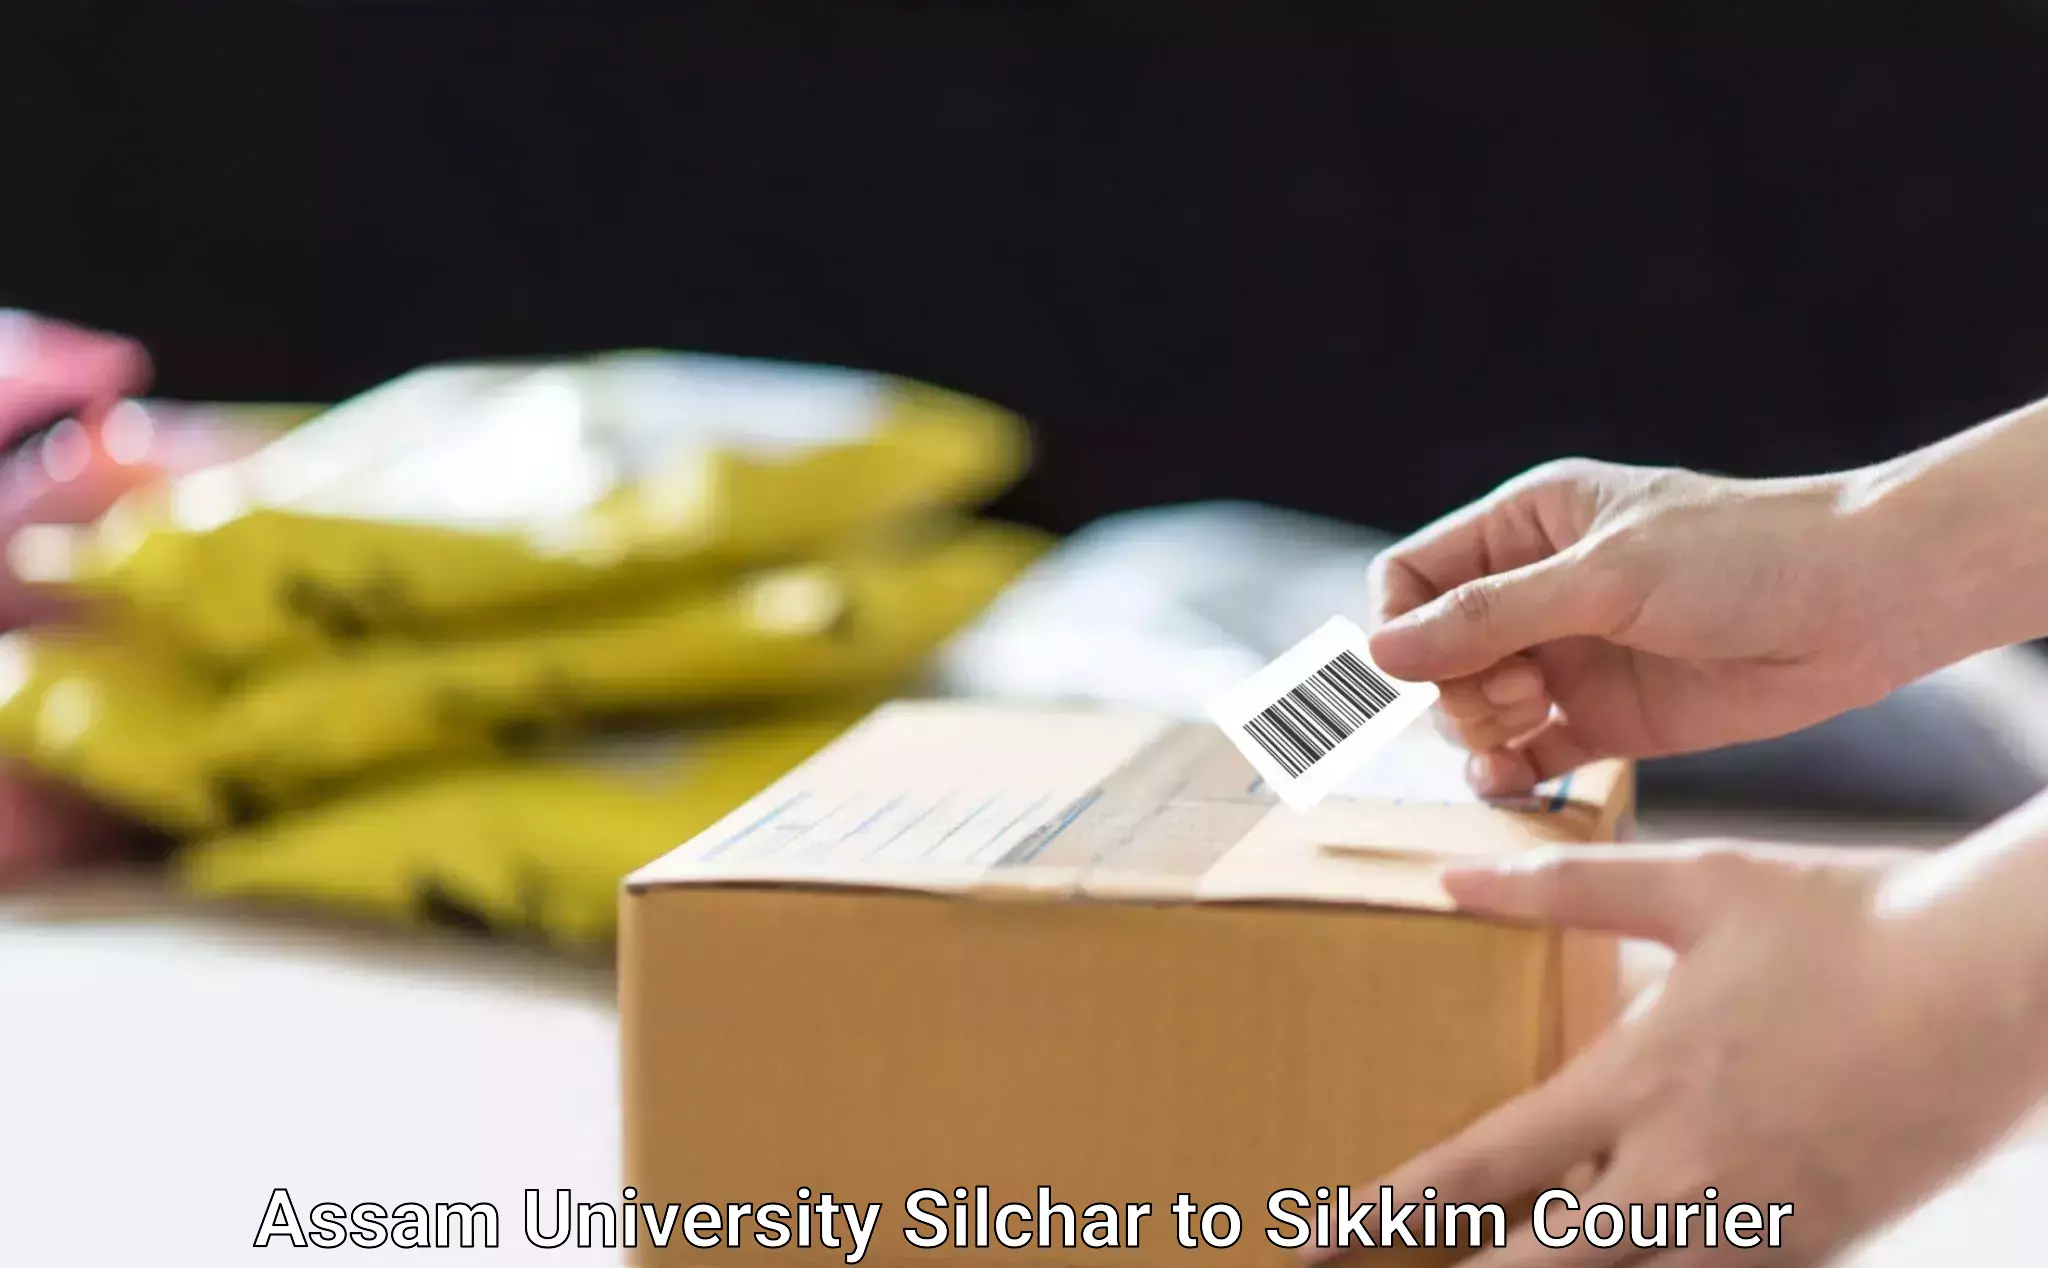 Multi-national courier services Assam University Silchar to Pelling